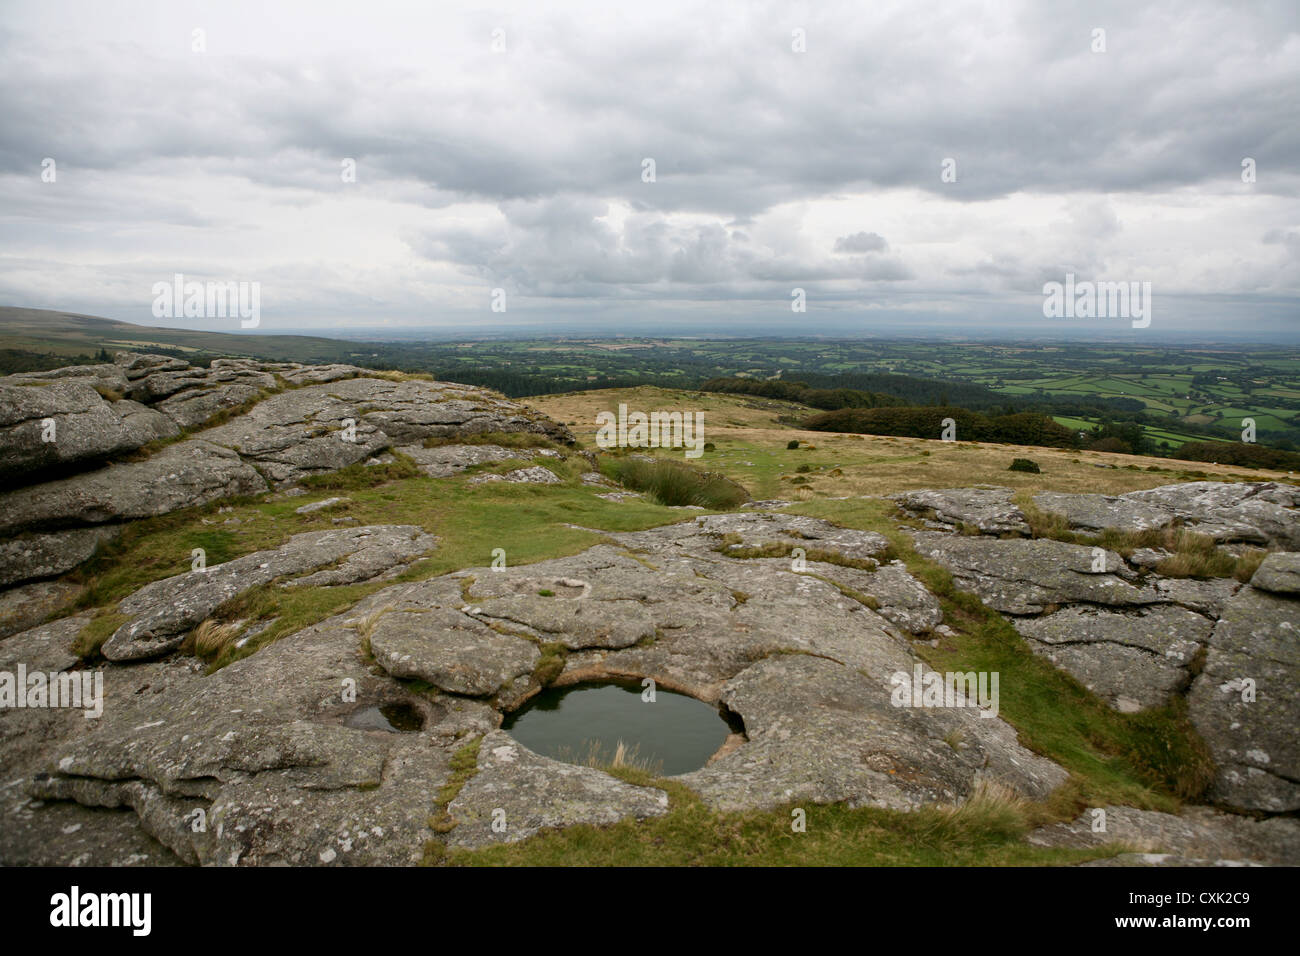 Far reaching view from the top of Kestor Rock, with water filled rock basin / pool in foreground, Dartmoor National Park, UK Stock Photo